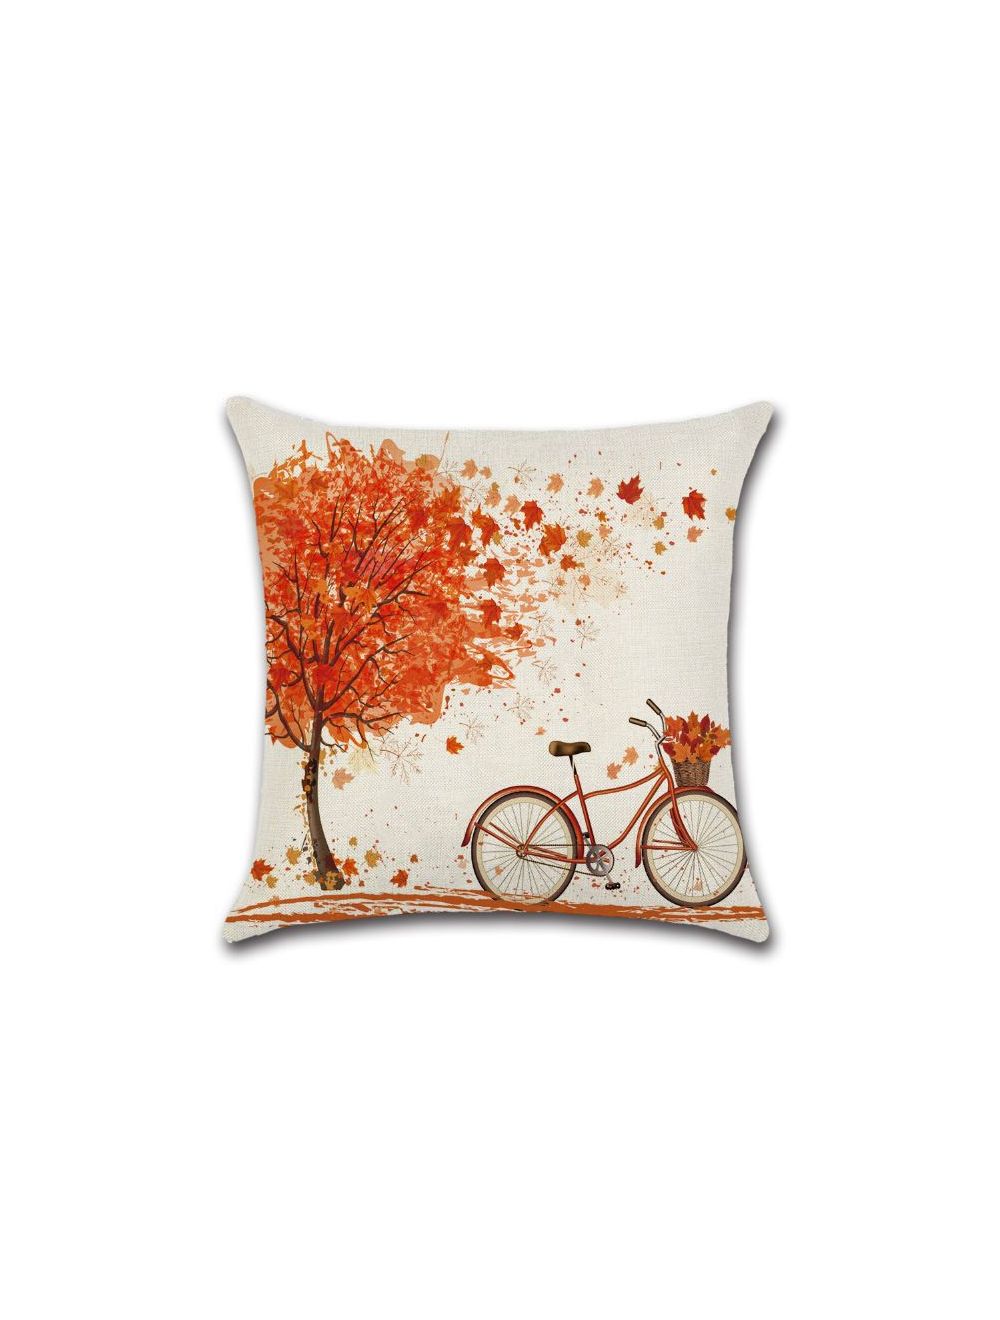 Rishahome Flowers on Bicycle Printed Cushion Cover 45x45 cm-9C66H0009